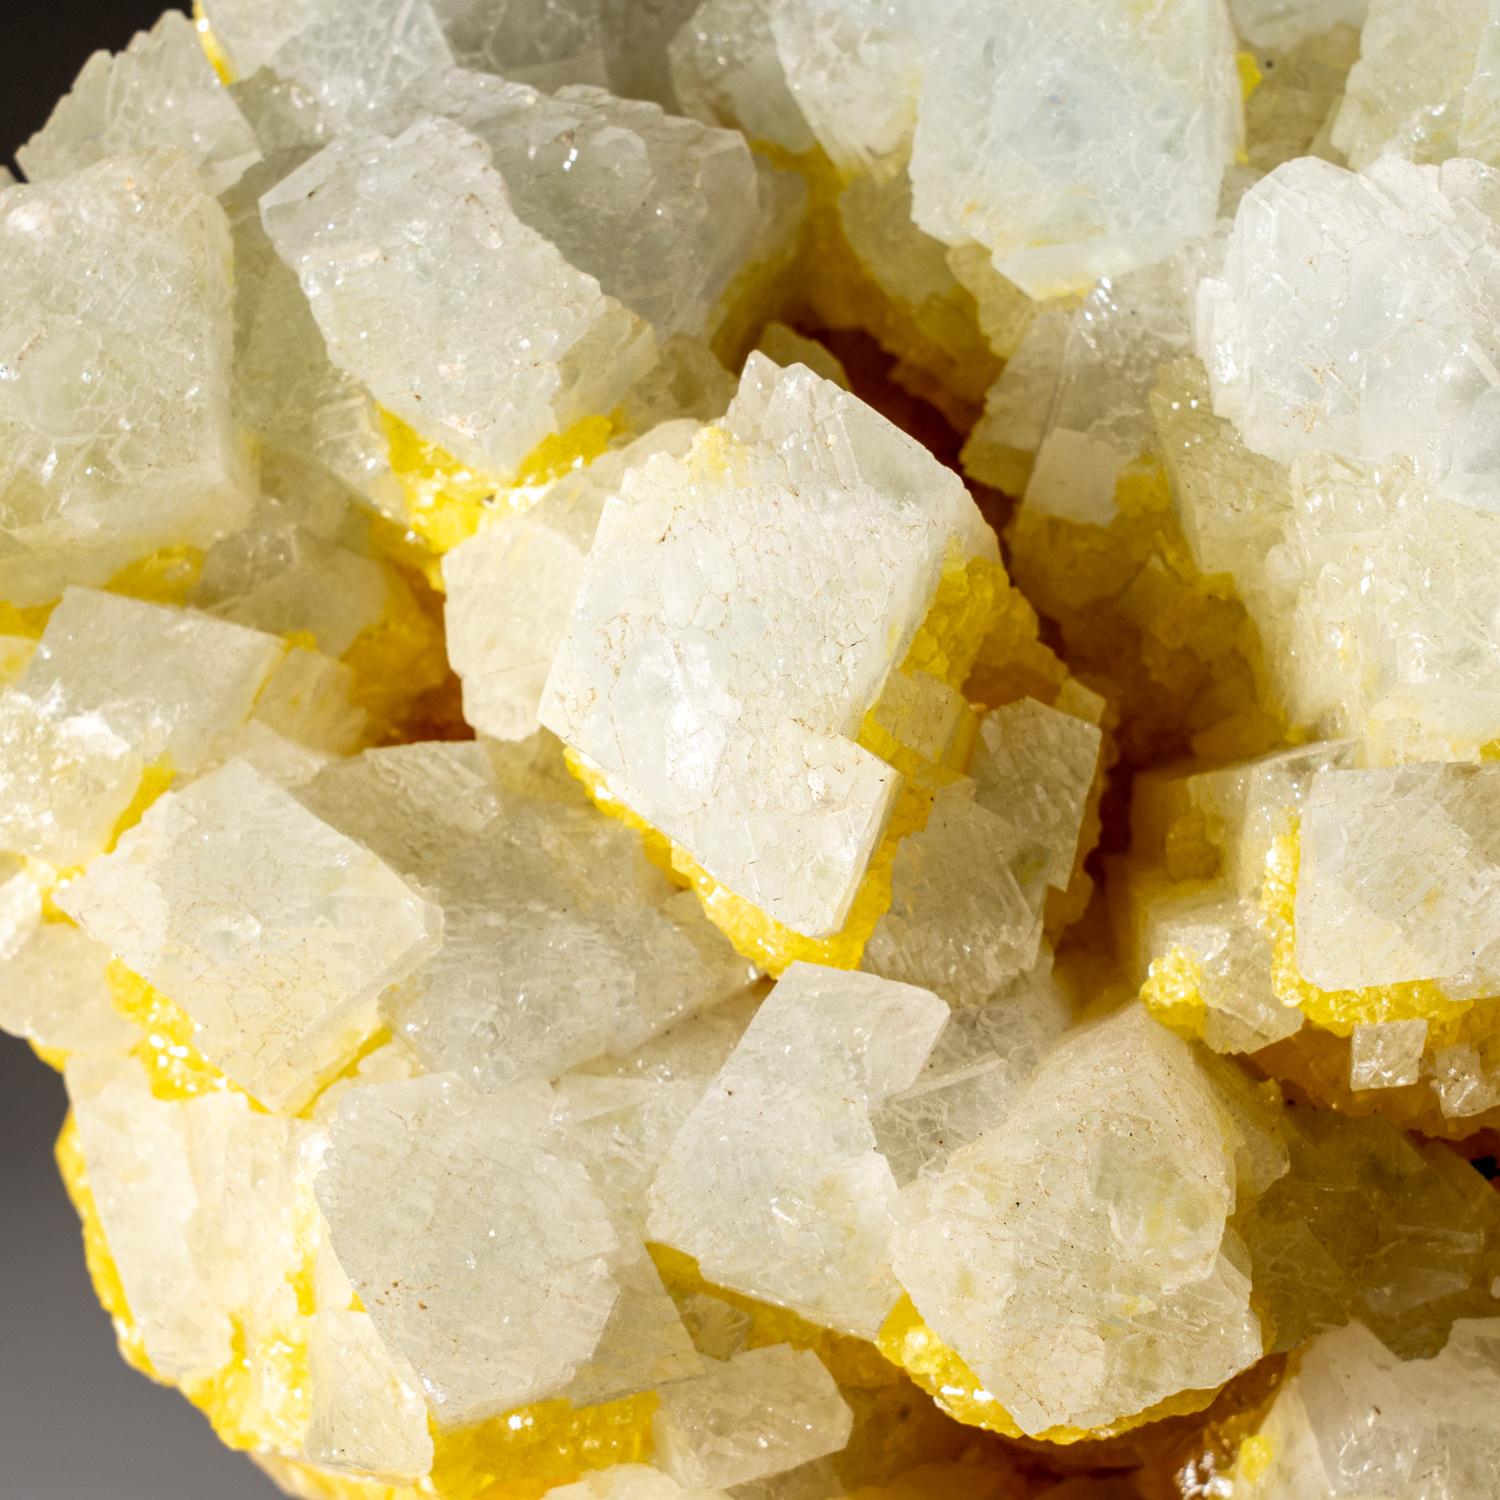 From La Grasta Mine, Delia, Caltanissetta Province, Sicily, Italy

Colorless translucent prismatic celestine crystals with lustrous crystal faces, on crystallized translucent yellow sulfur.


Weight: 4.7 lbs, Size: 5 x 3 x 5 inches